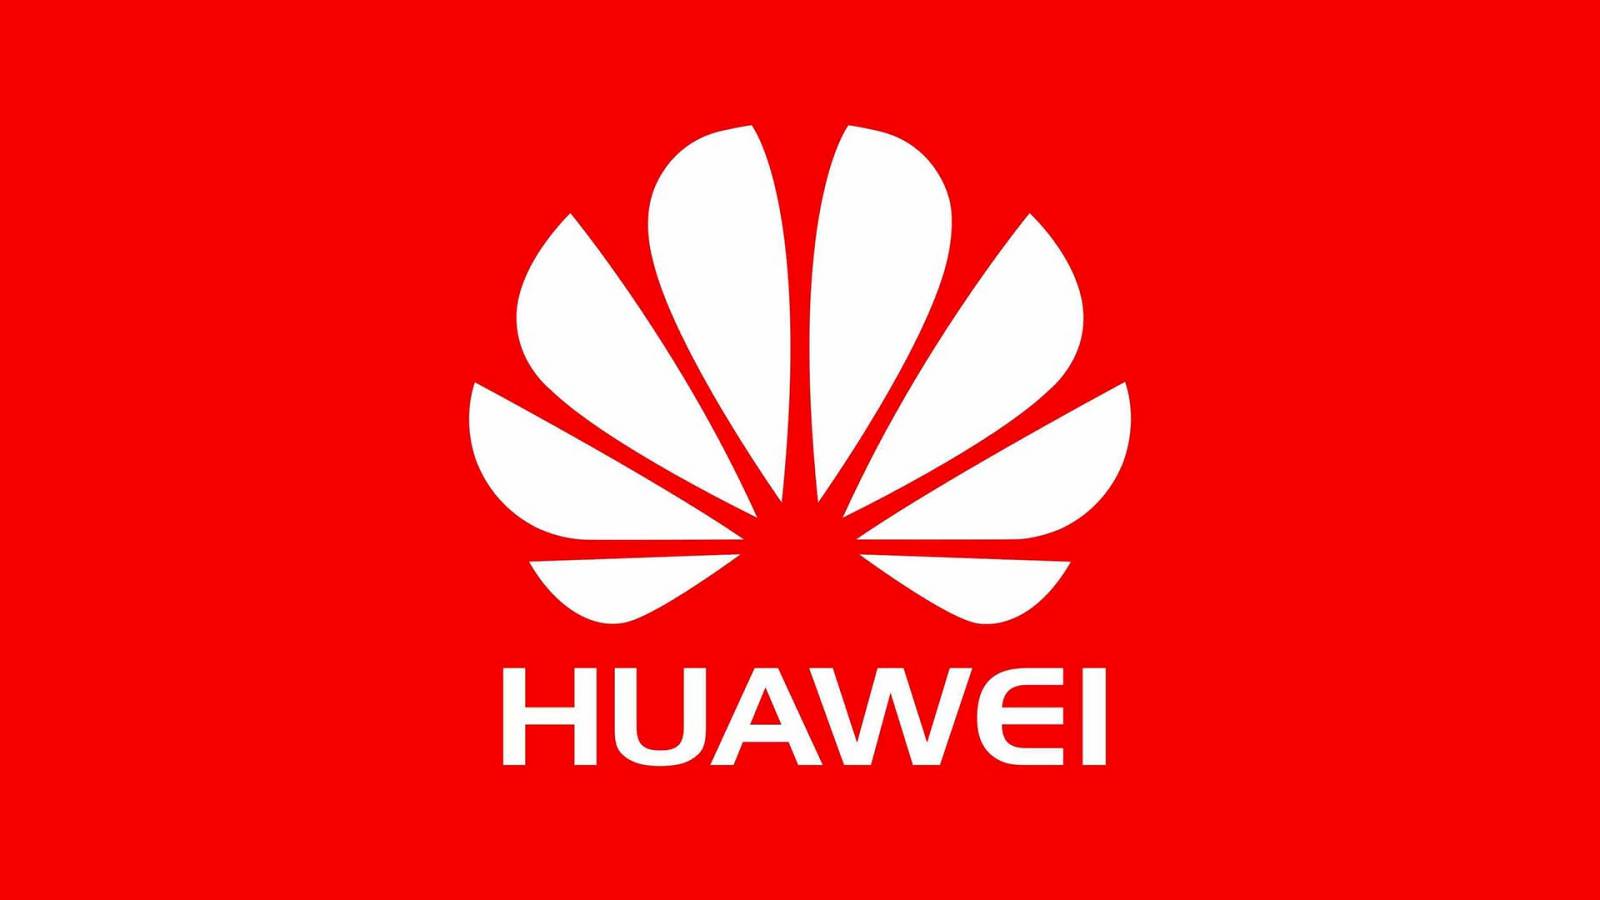 Huawei seemed Completely IMPOSSIBLE Surprising a lot of people